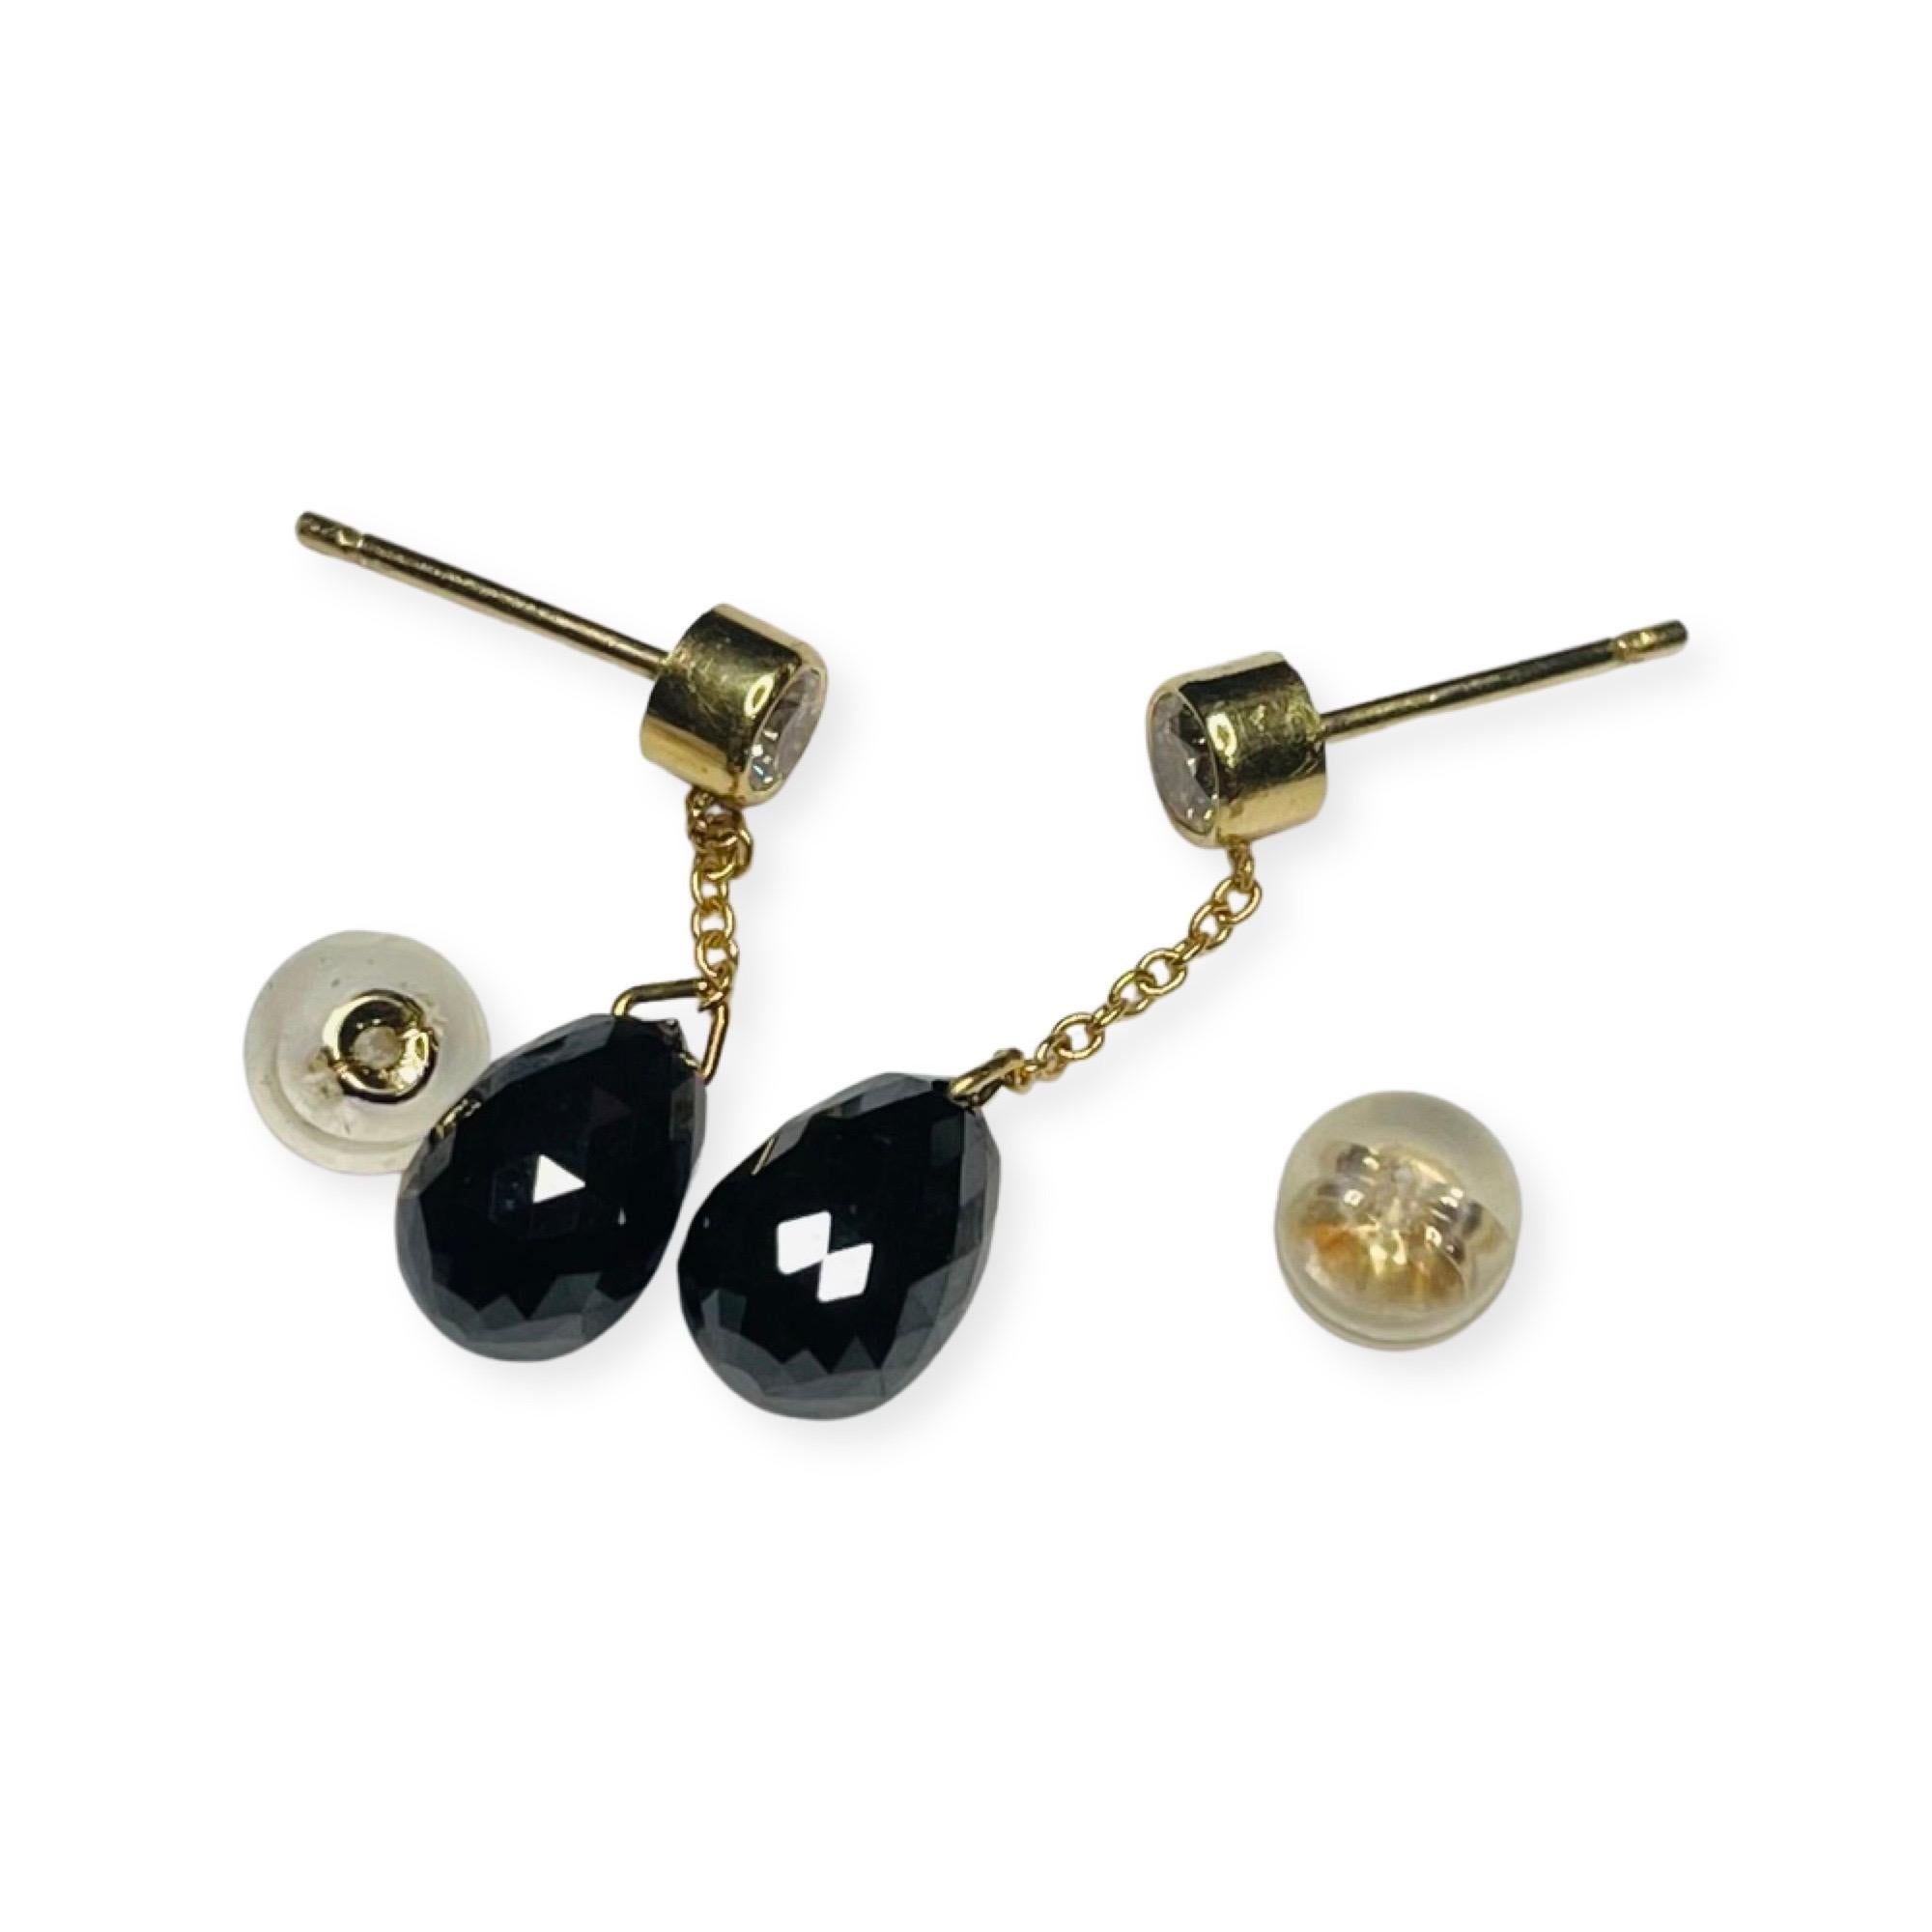 Lithos 18K Yellow Gold Black Diamond Briolette Drops on White Diamond Stud Earrings. There are 2, full cut round brilliant diamonds, bezel set in 18K white gold.  There is a total white diamond weight of 0.315 carats. They have posts and silicon ear